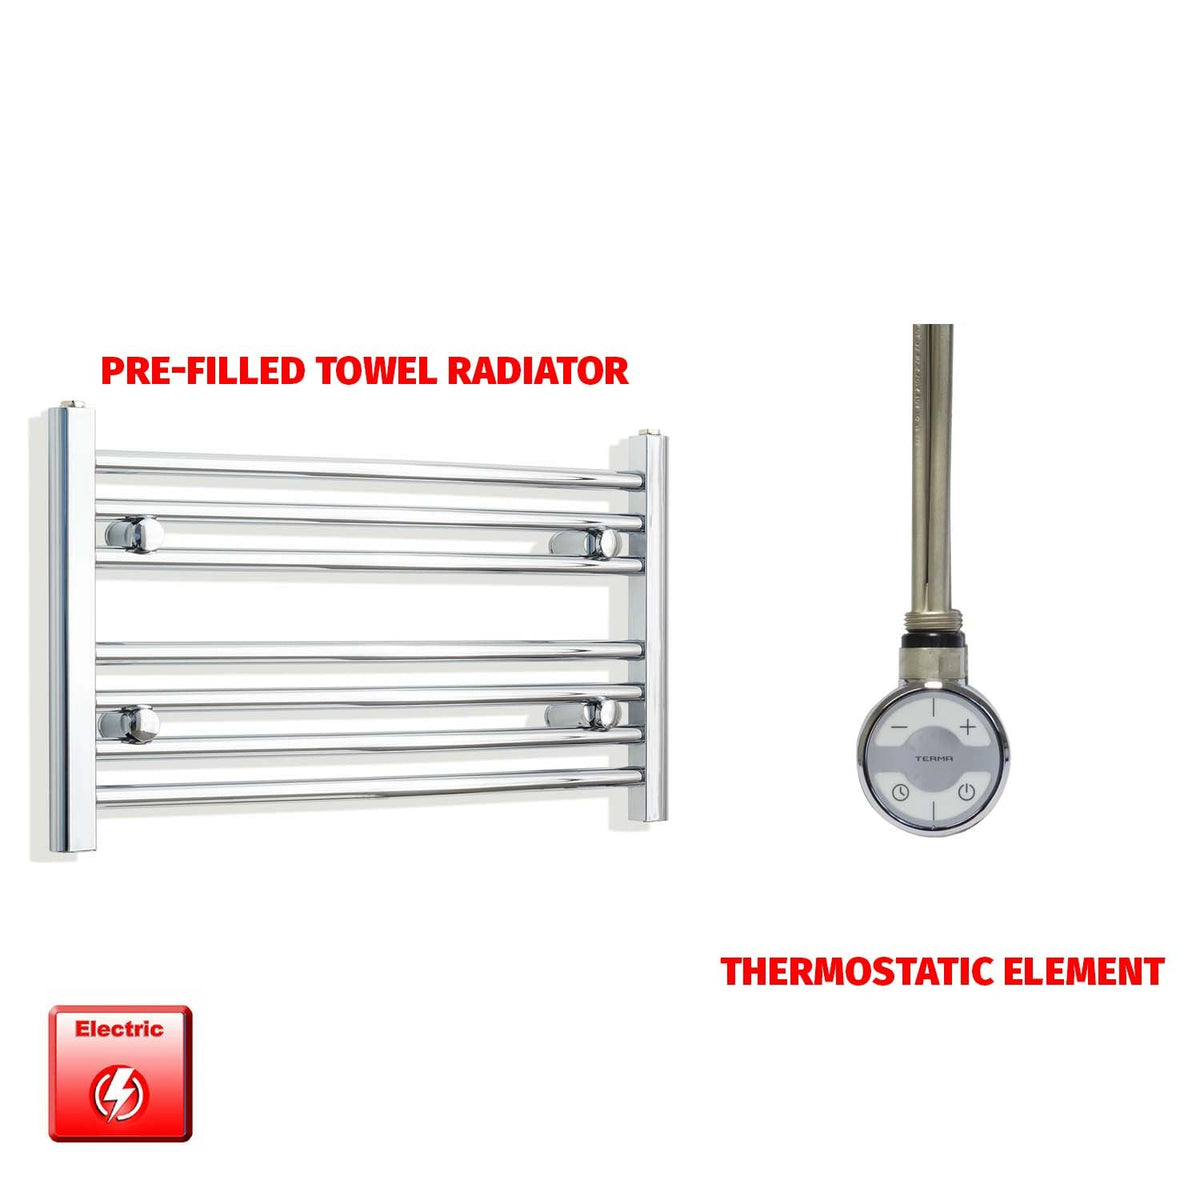 400mm High 700mm Wide Pre-Filled Electric Heated Towel Radiator Curved or Straight Chrome MOA Thermostatic element no timer